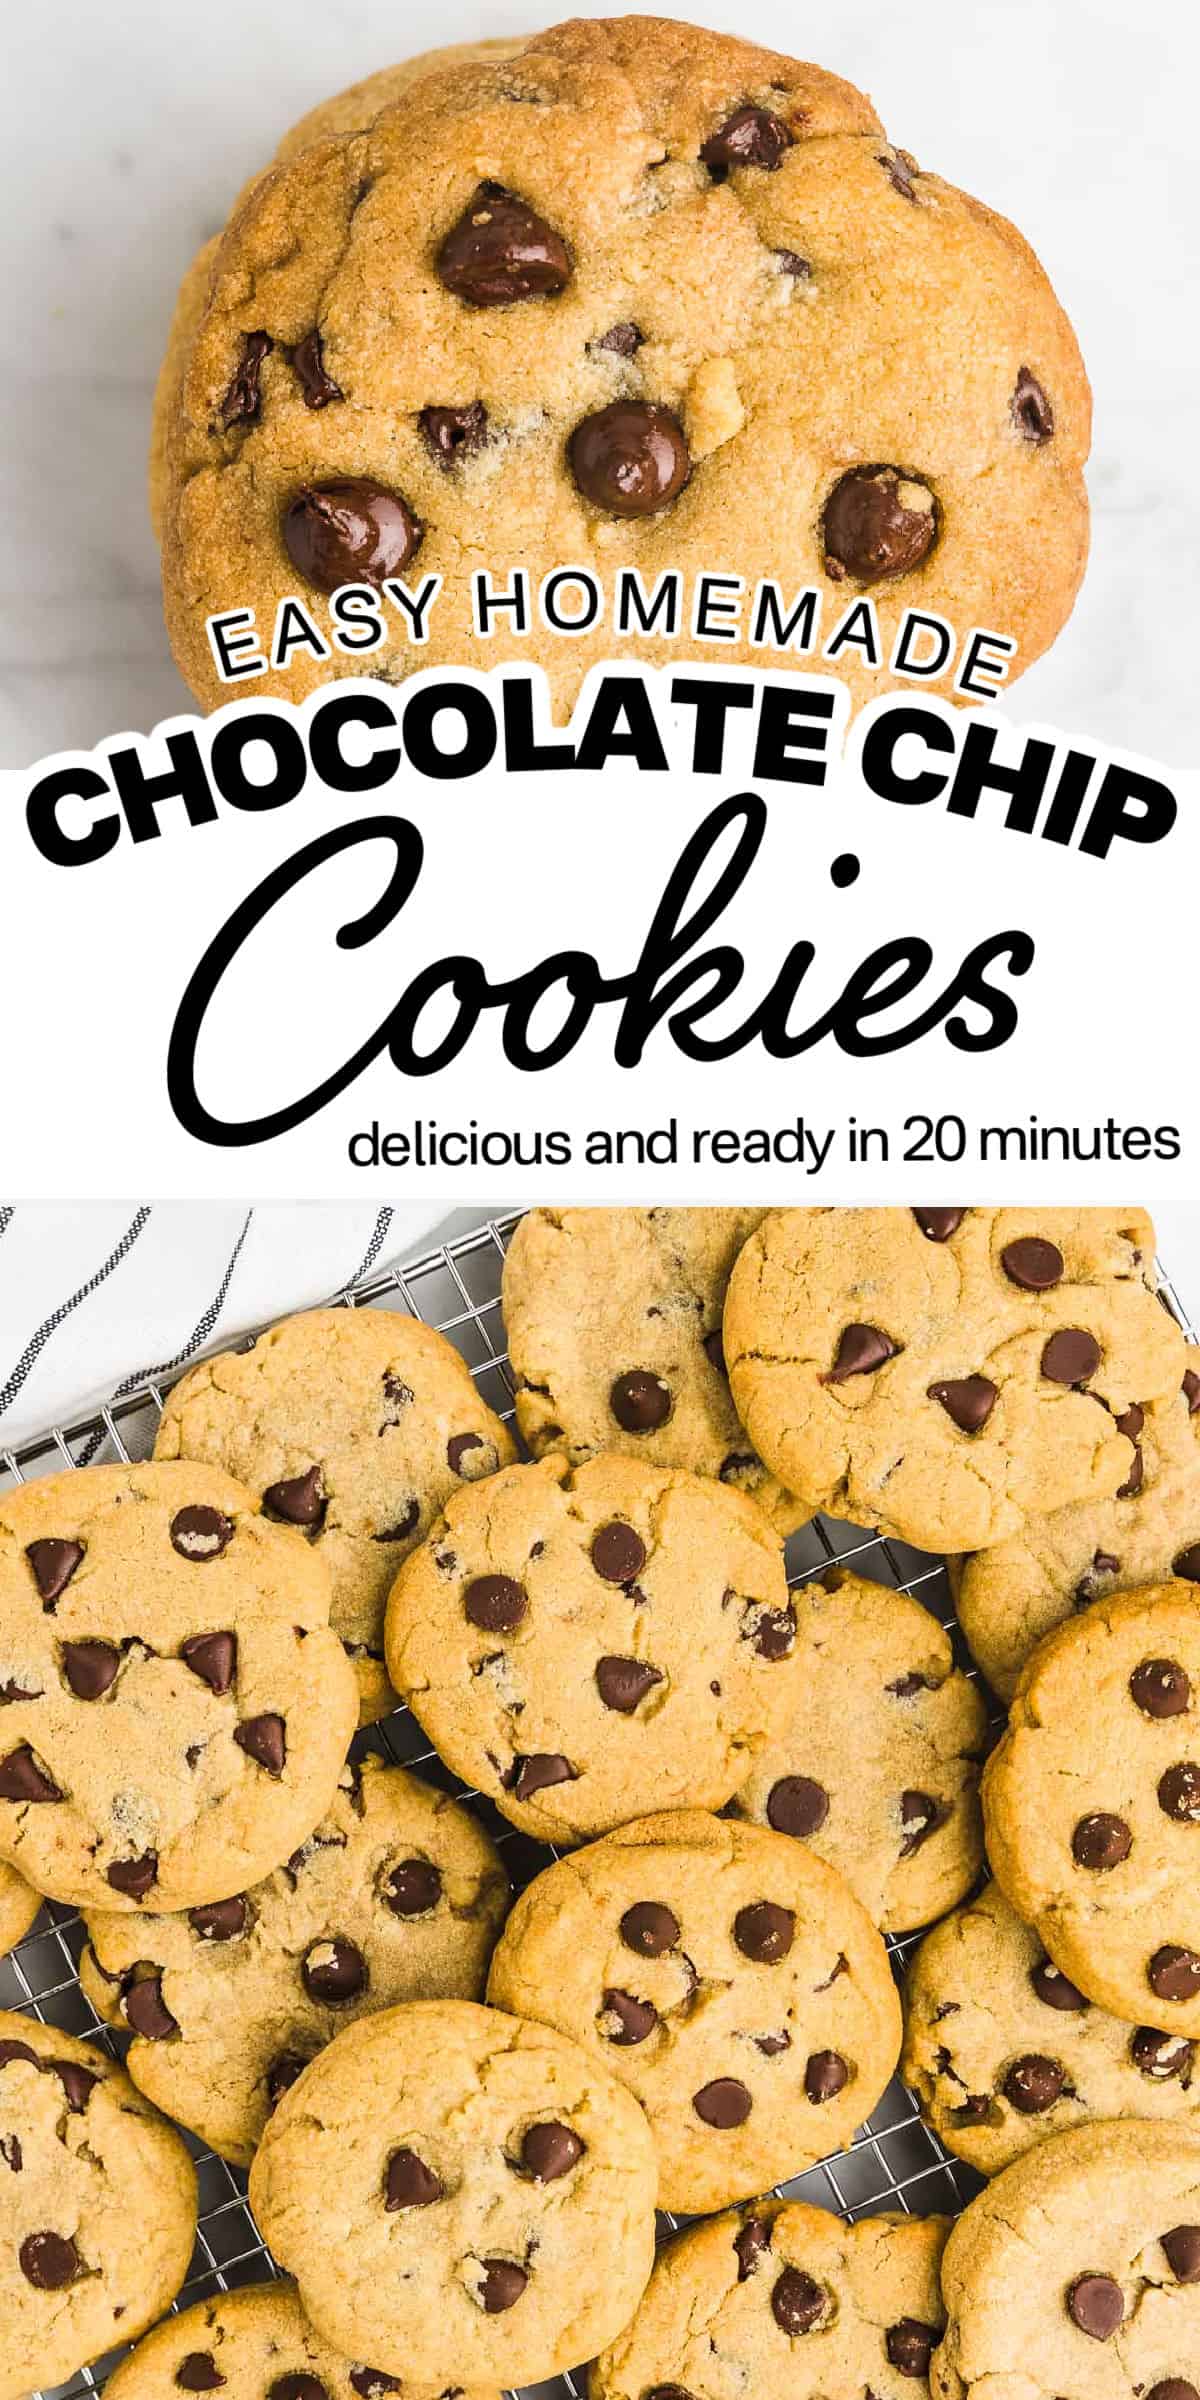 You'll never want another chocolate chip cookie recipe again! They're sweet and soft, with the right amount of crisp and irresistible chocolatey. Best of all, you'll just need 7 ingredients, and the first batch is ready in just about 20 minutes. #cheerfulcook #chocolatechipcookie #cookies #chocolatechip #recipe #easy #puddingmix  via @cheerfulcook